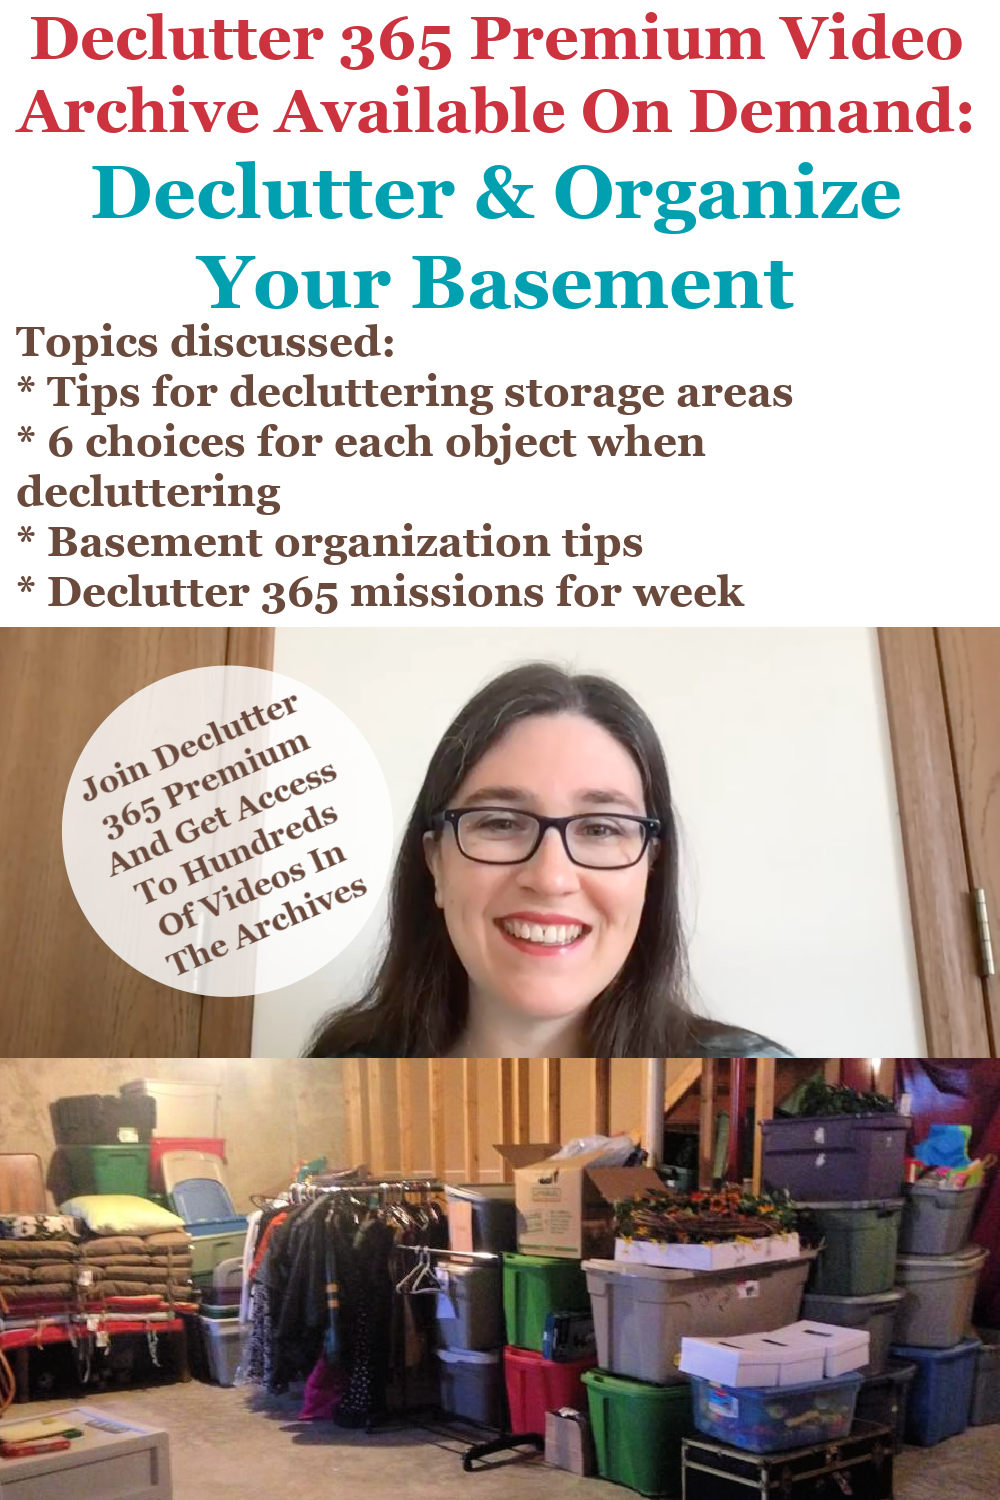 Declutter 365 Premium video archive available on demand all about decluttering and organizing your basement, on Home Storage Solutions 101